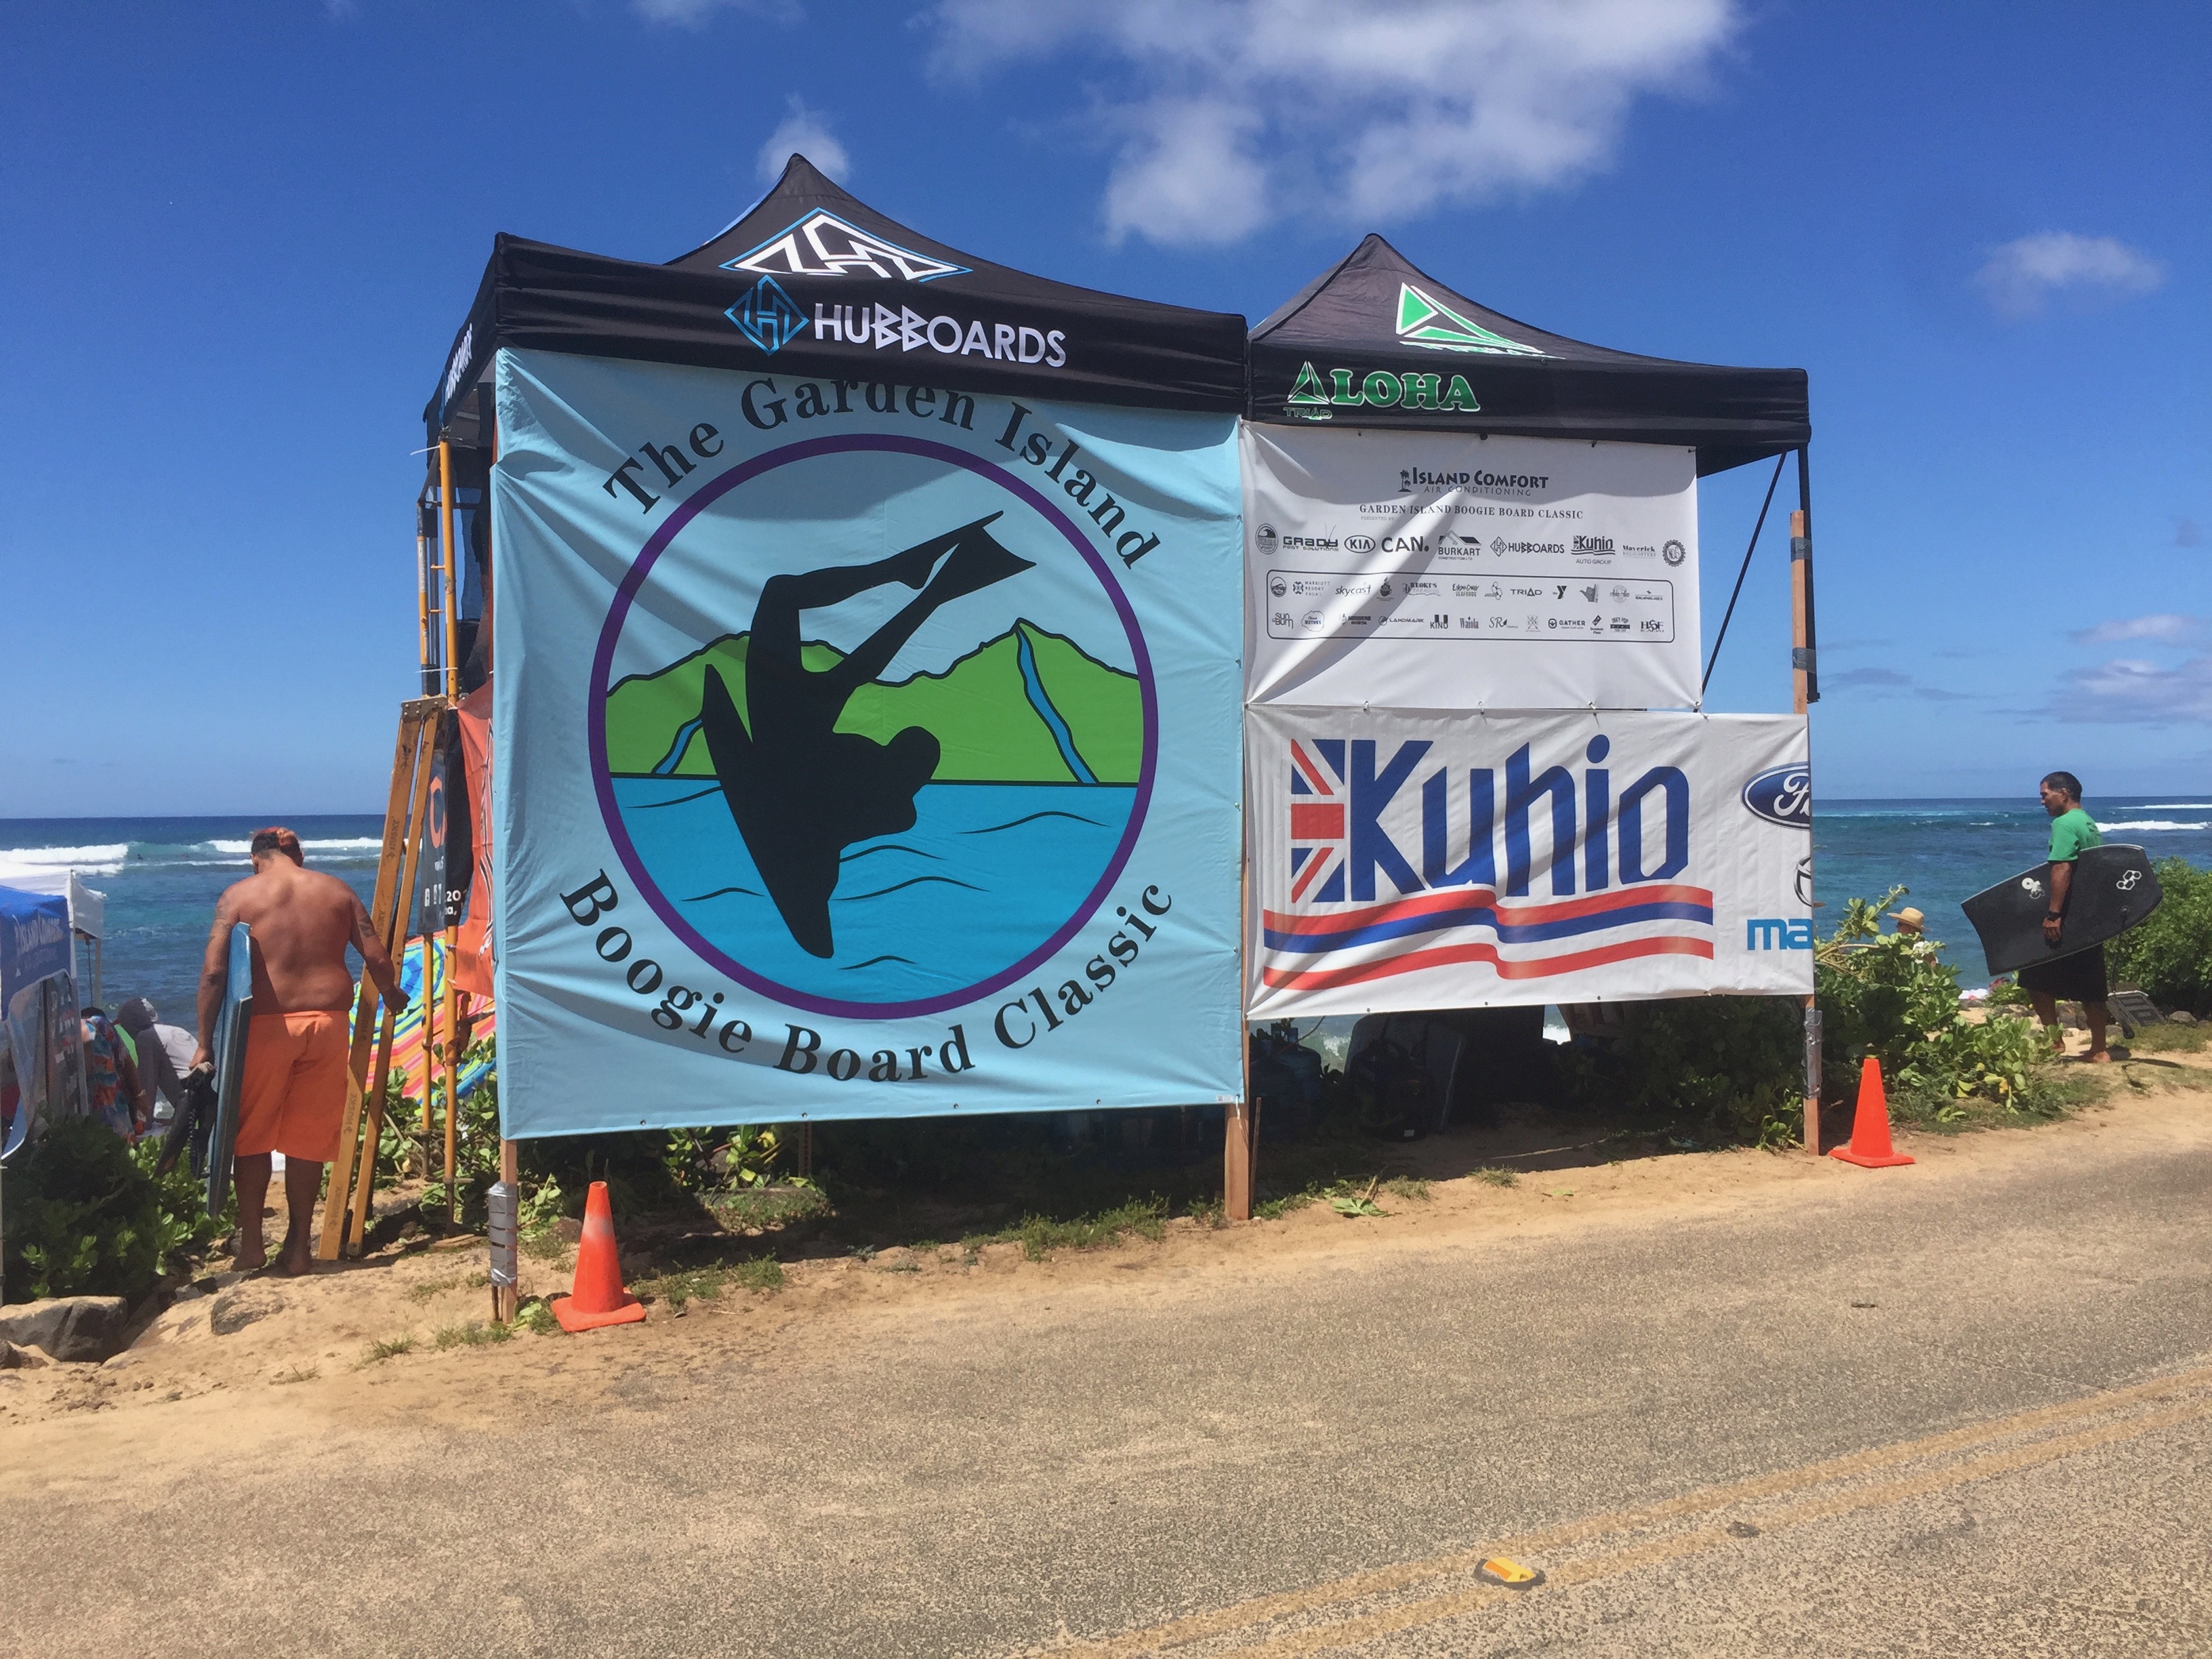 The Charity Fitness Tour swims over to The First Annual Garden Island “Boogie Board Classic” on Kauai, Hawaii